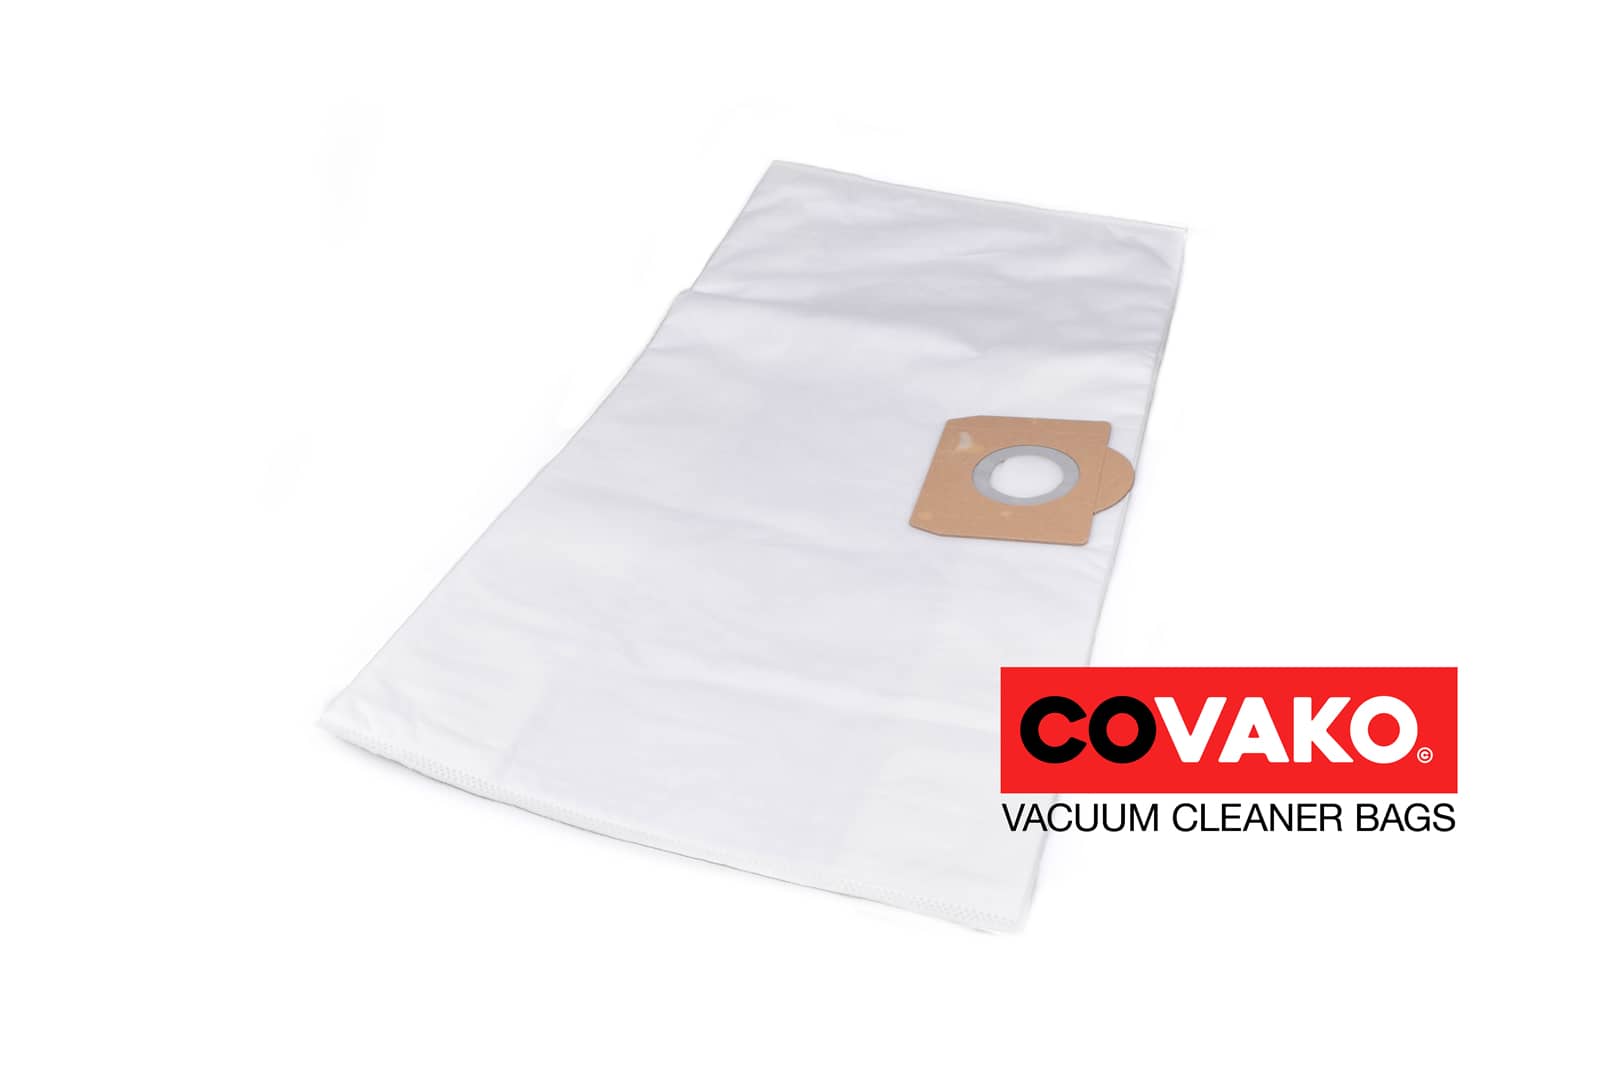 Nilco GS 35 / Synthesis - Nilco vacuum cleaner bags